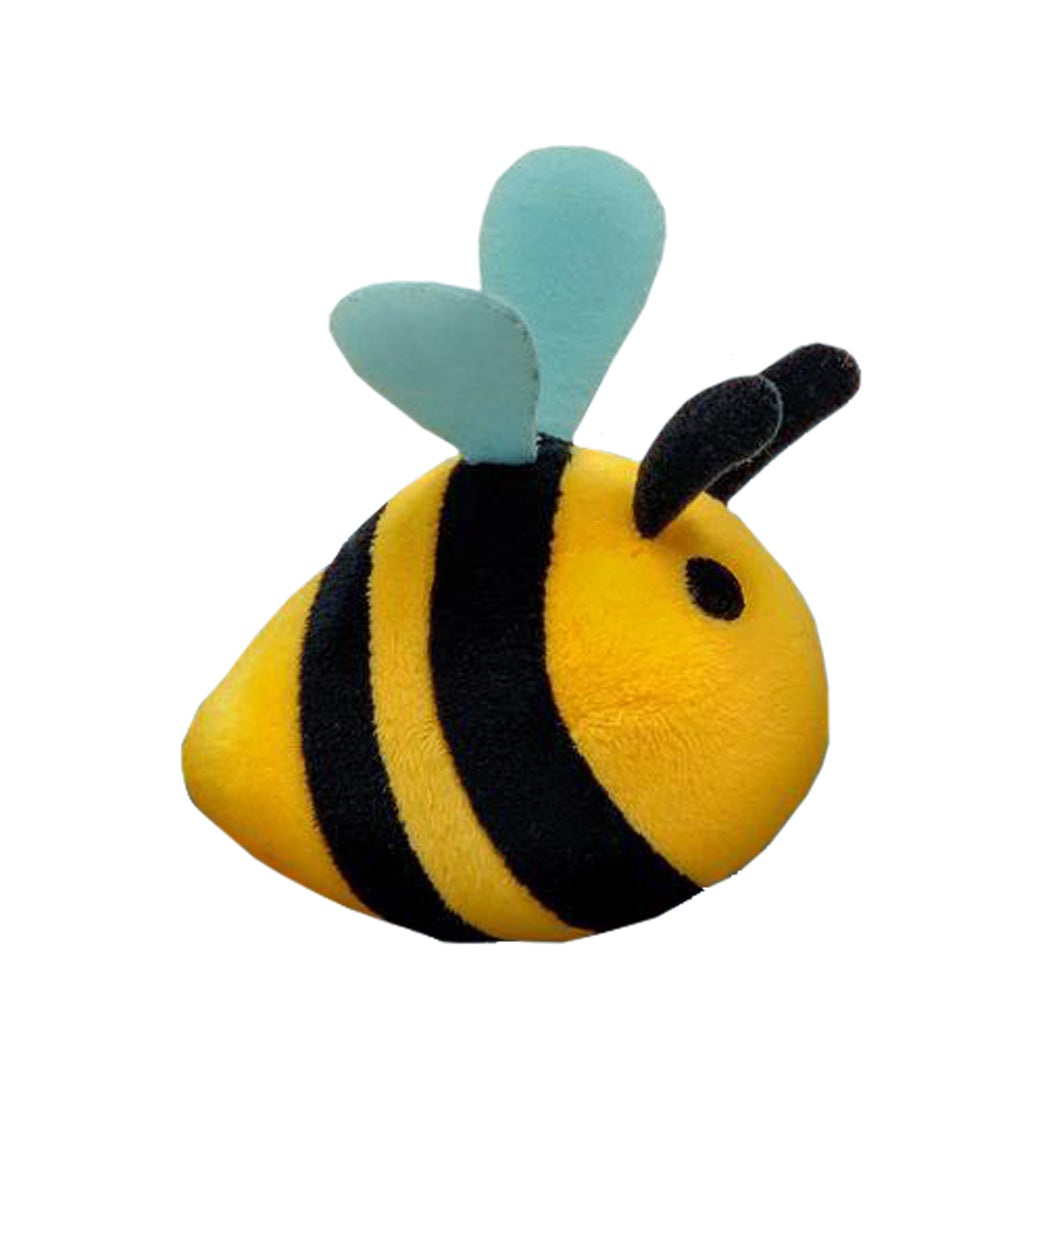 A yellow bee with two black stripes, black antena, black eyes, and light blue wings - from CGP Grey.